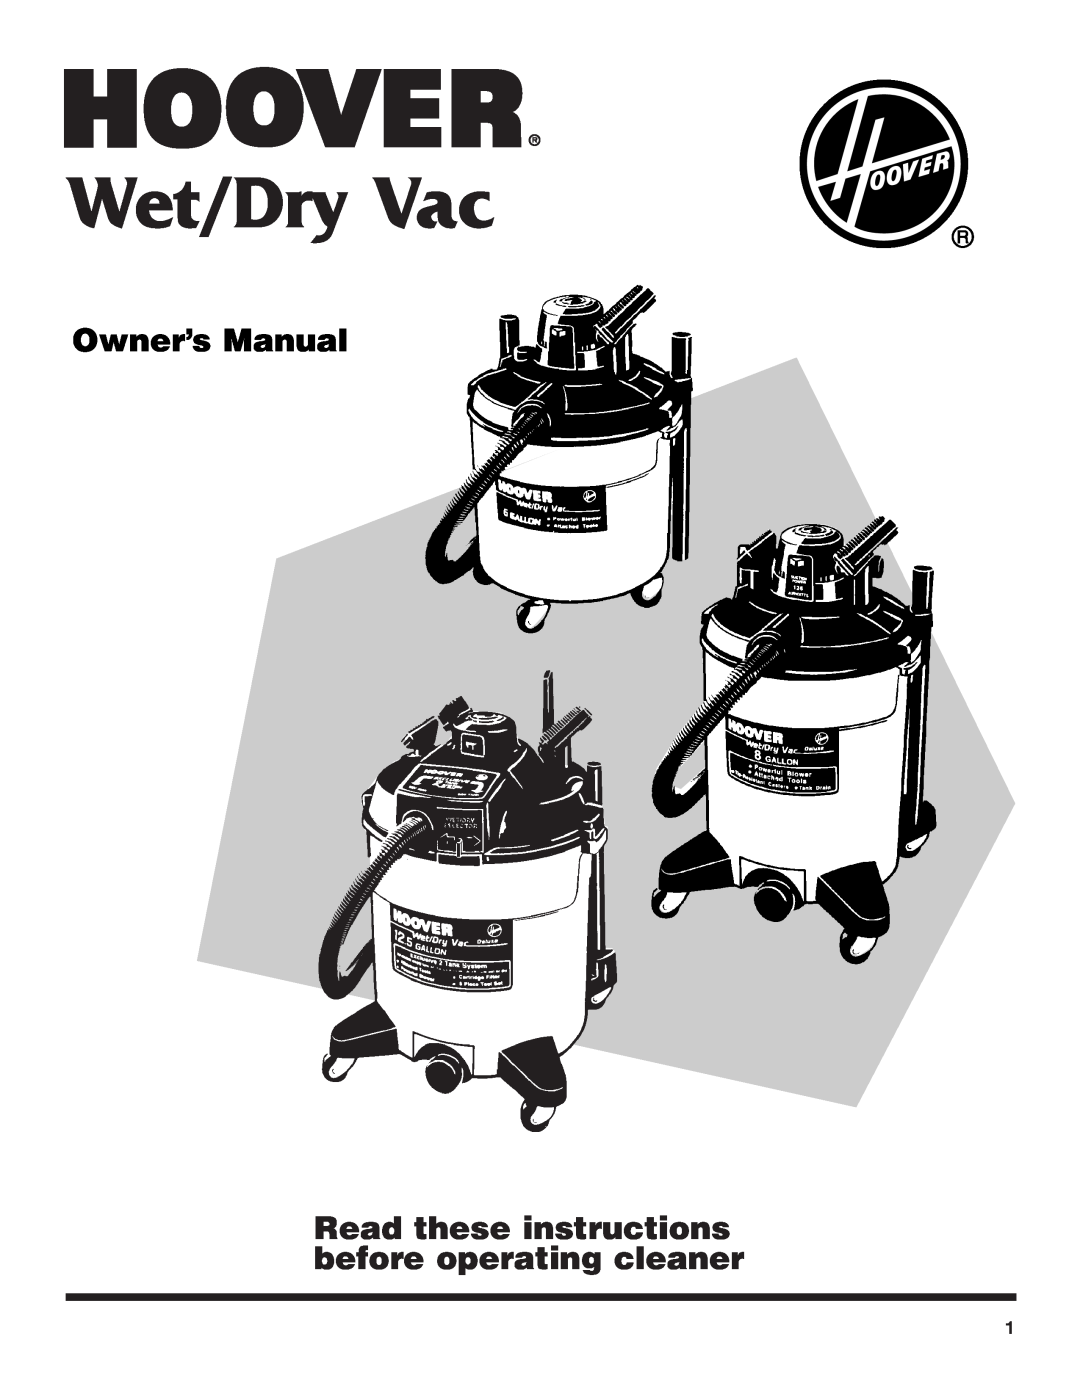 Hoover Wet/Dry Vacuum cleaner owner manual Owner’s Manual, Read these instructions before operating cleaner 